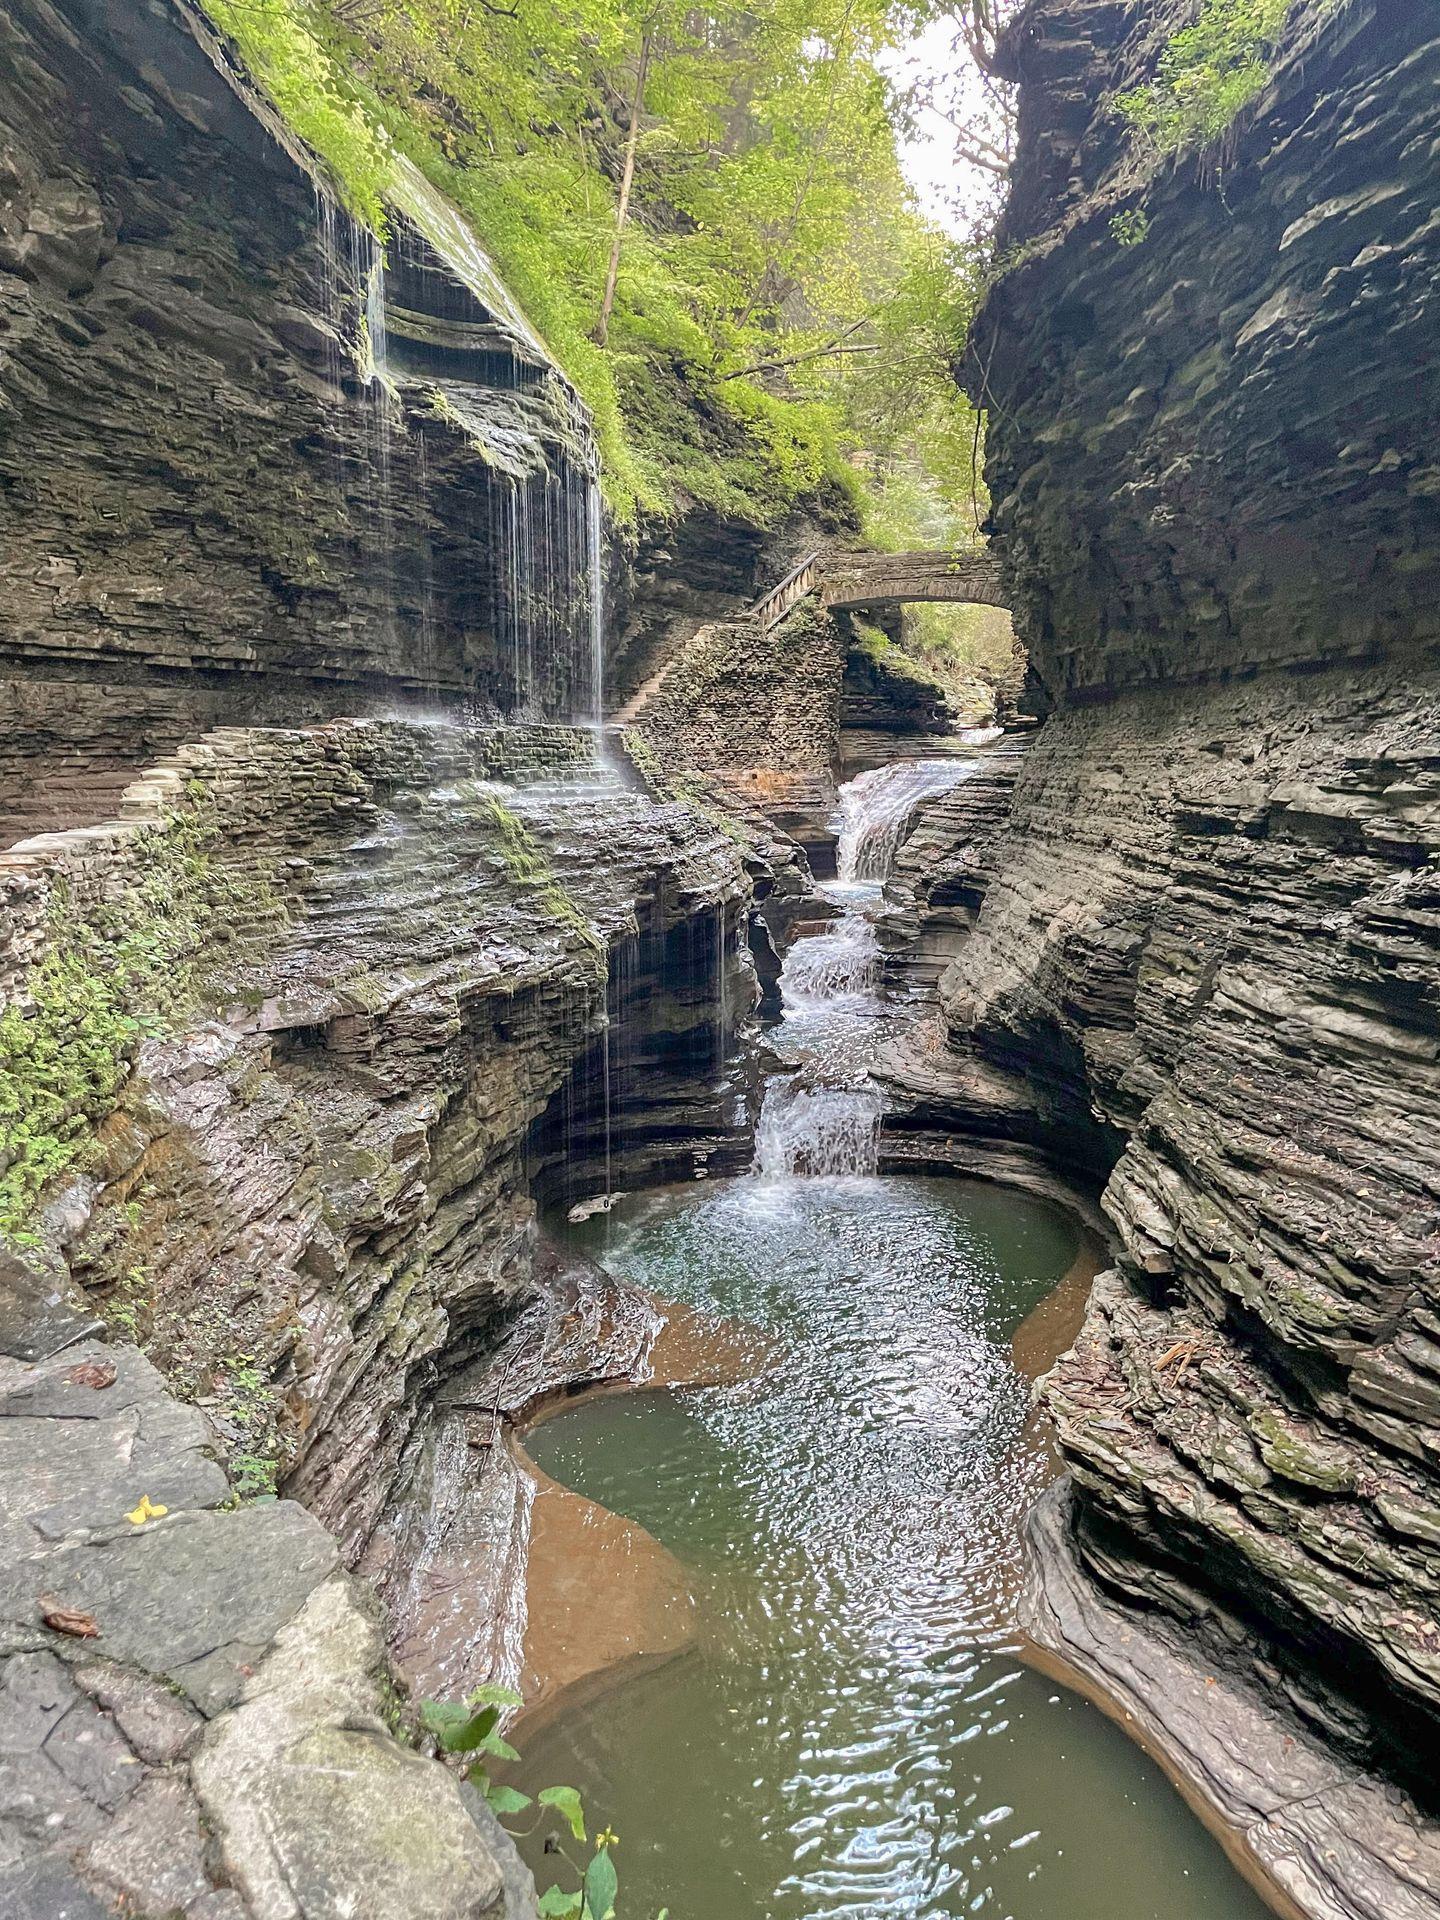 A view of the gorge at Watkins Glen that includes a waterfall, a stone bridge and water falling from the left side of the top of the gorge.